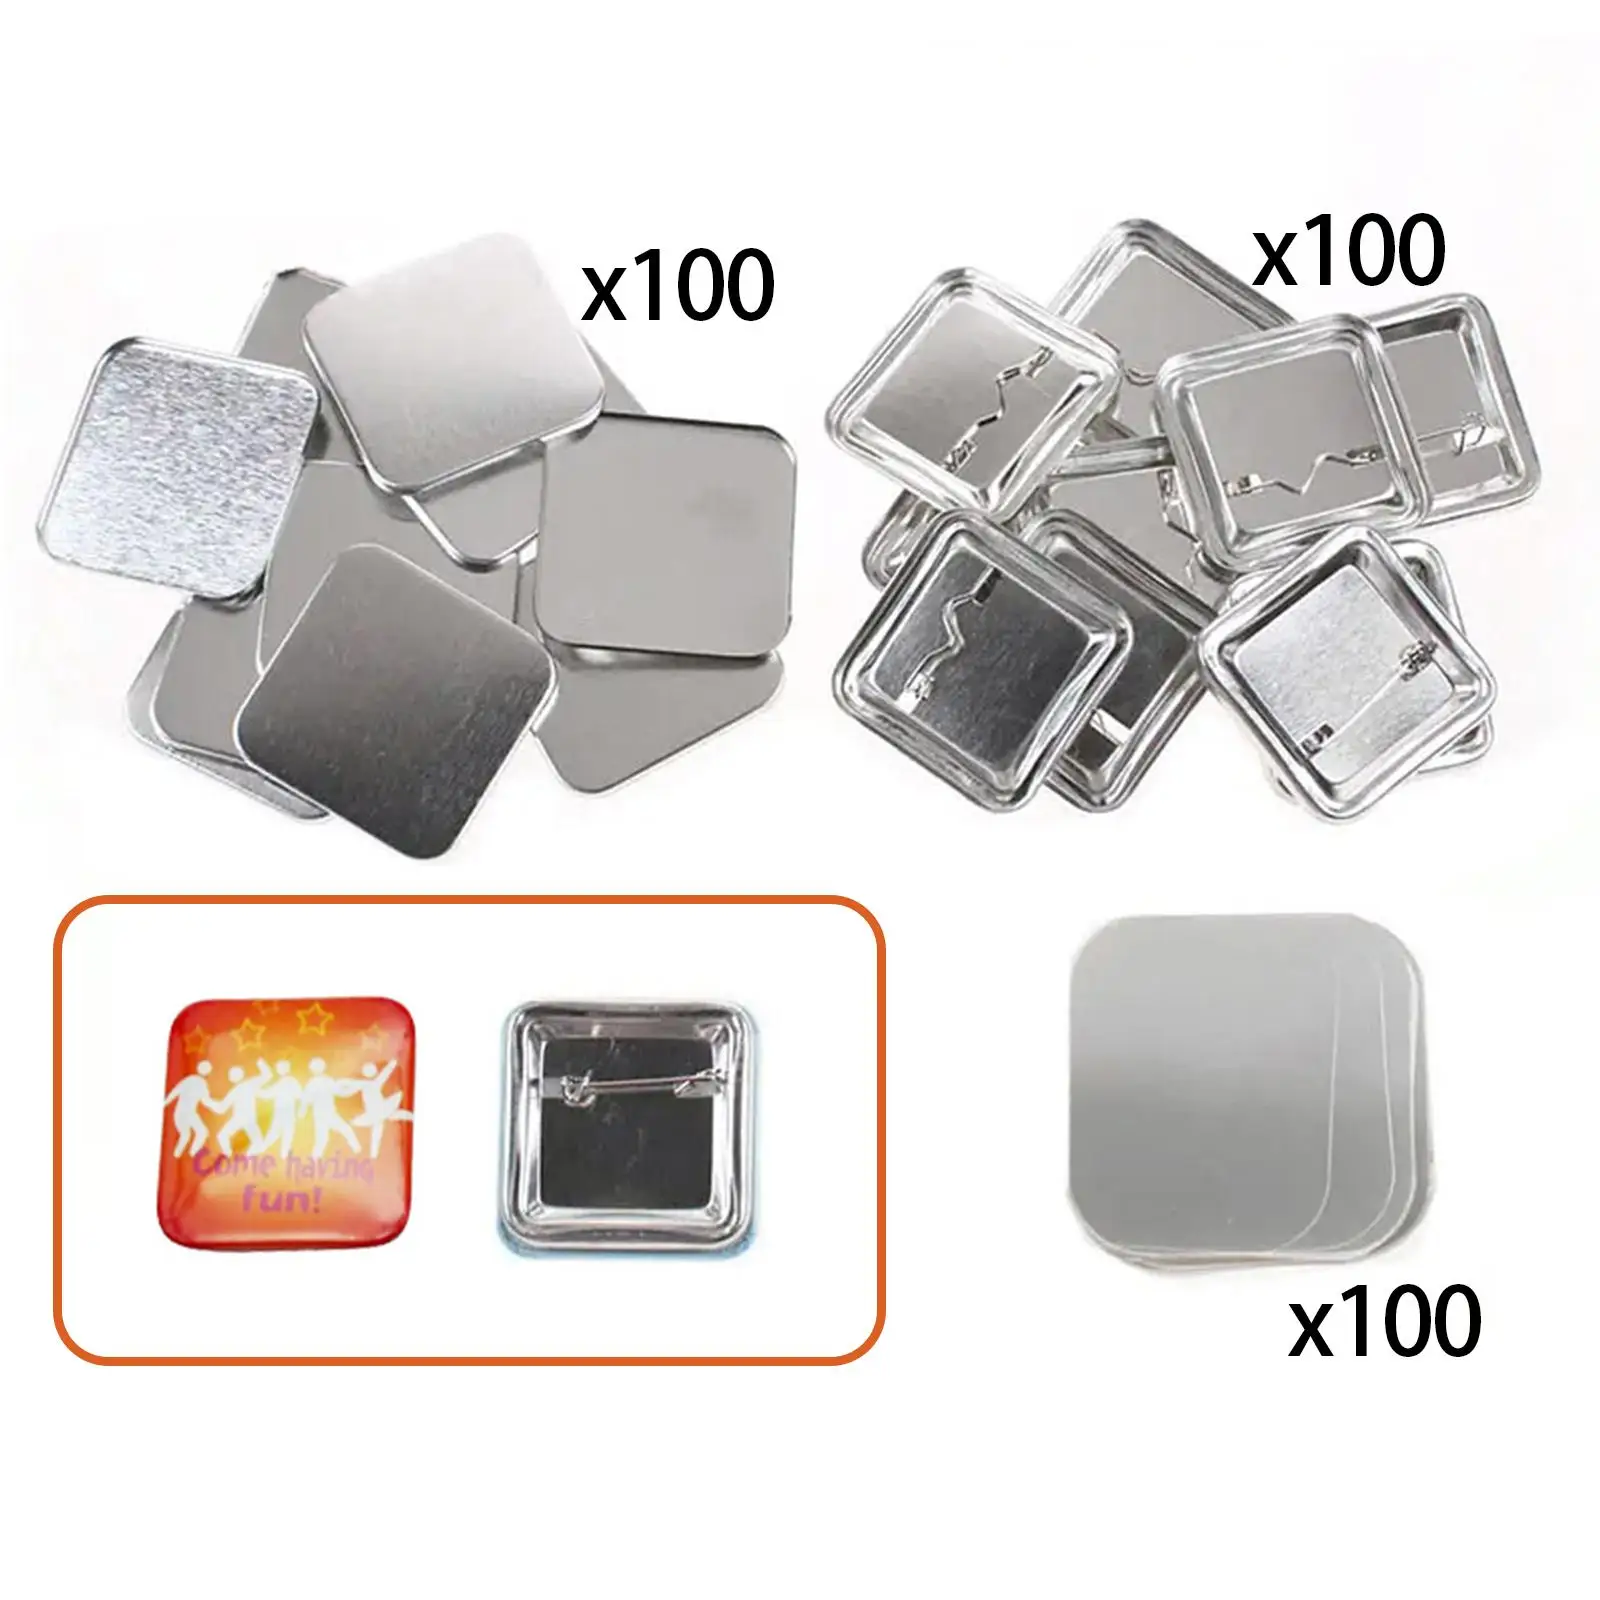 100Sets Blank Button Badge Supplies Square Shape Metal Button Material Badge Kit for DIY Souvenirs Gifts Crafting Jewelry Making